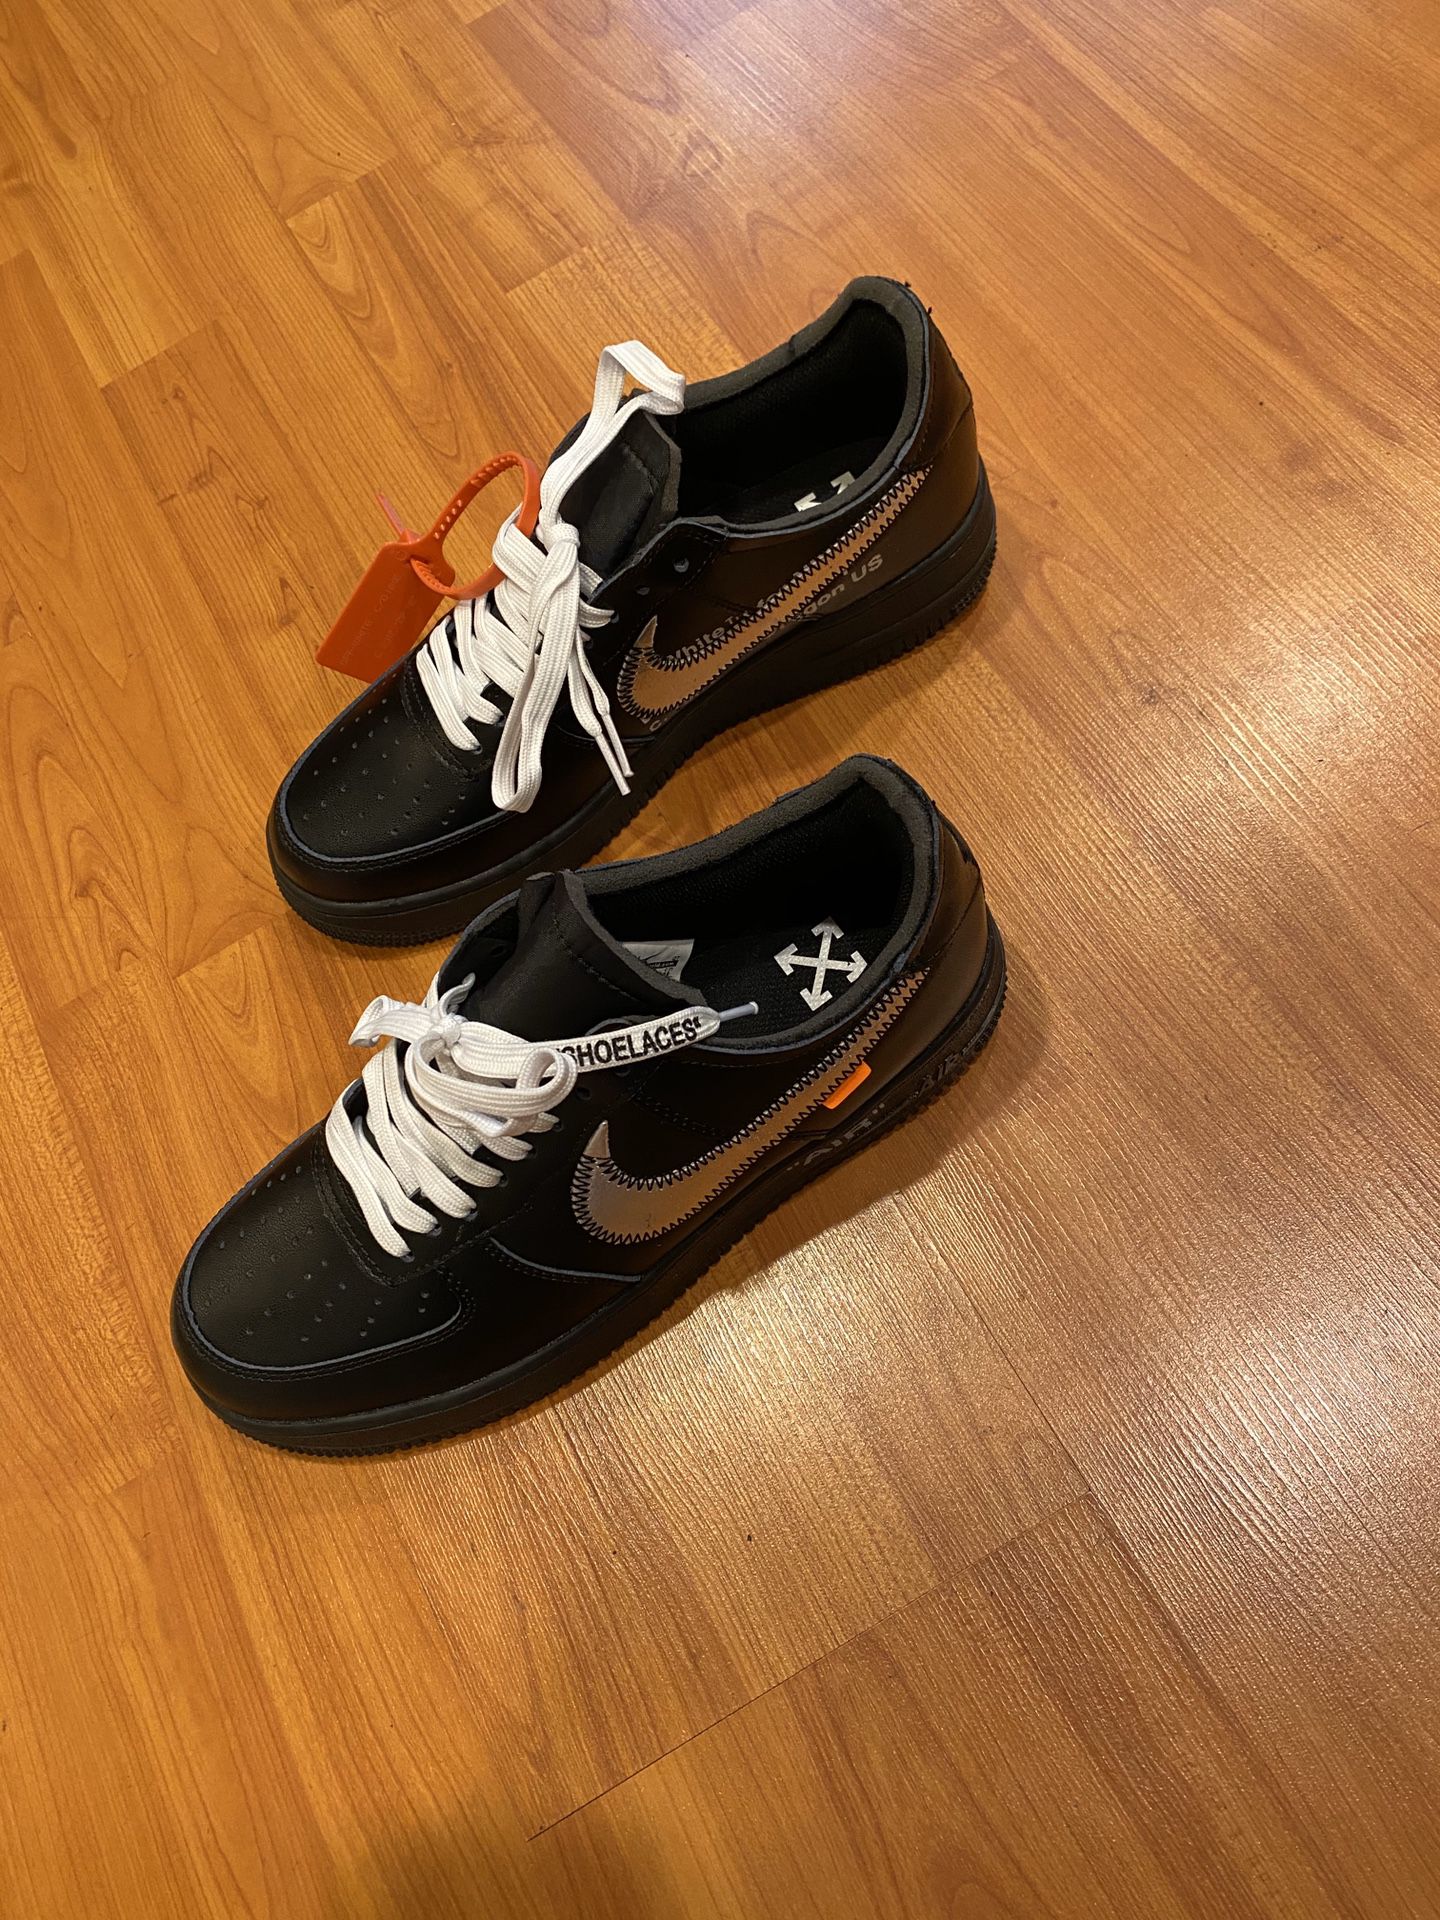 Size 11 - Nike Air Force 1 Low '07 x OFF-WHITE MoMA 2018 for sale online